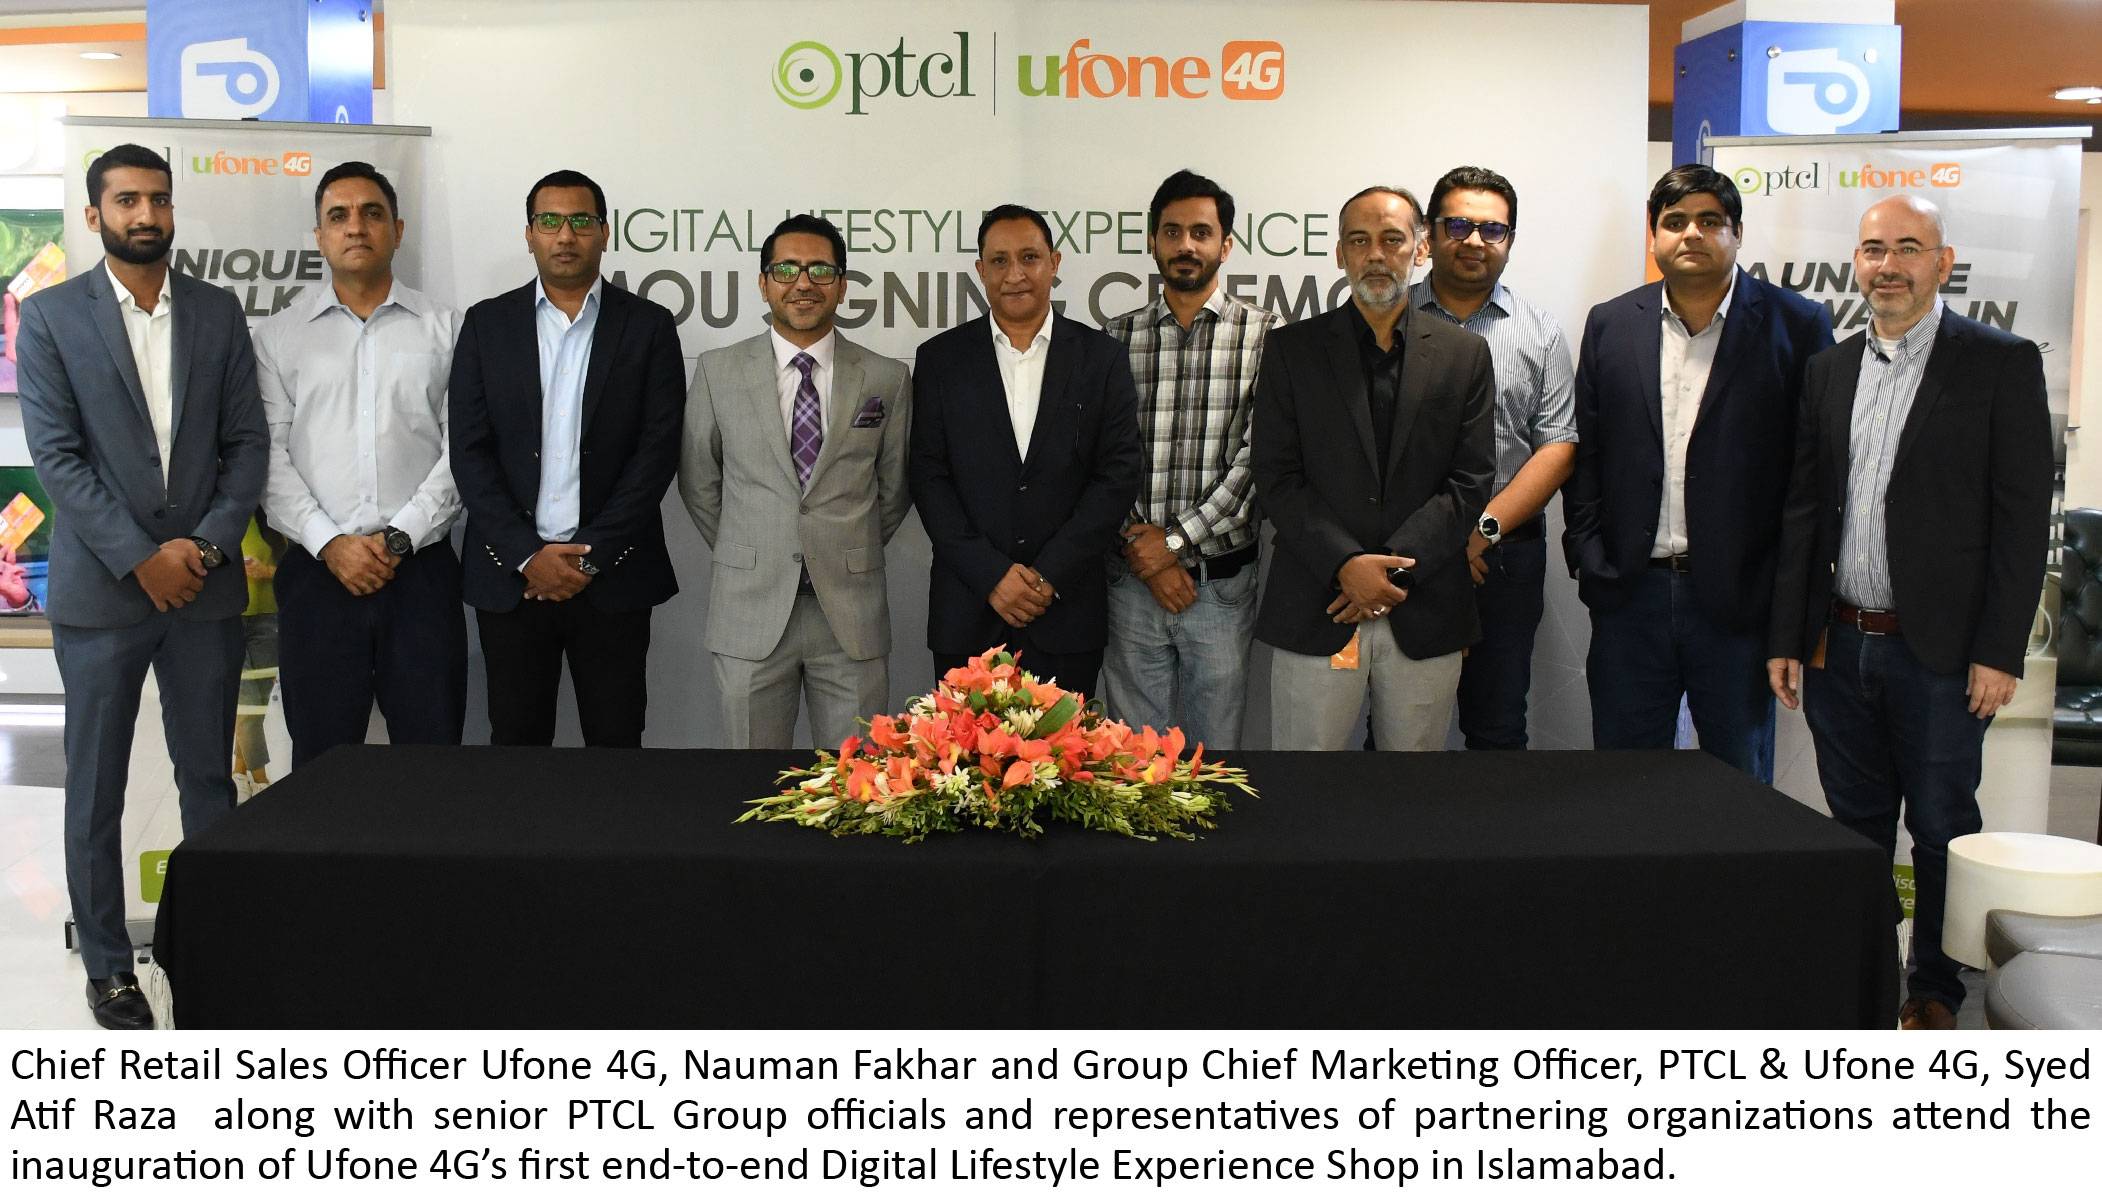 Ufone 4G launches end-to-end Digital Lifestyle Experience Shops  to boost customer satisfaction